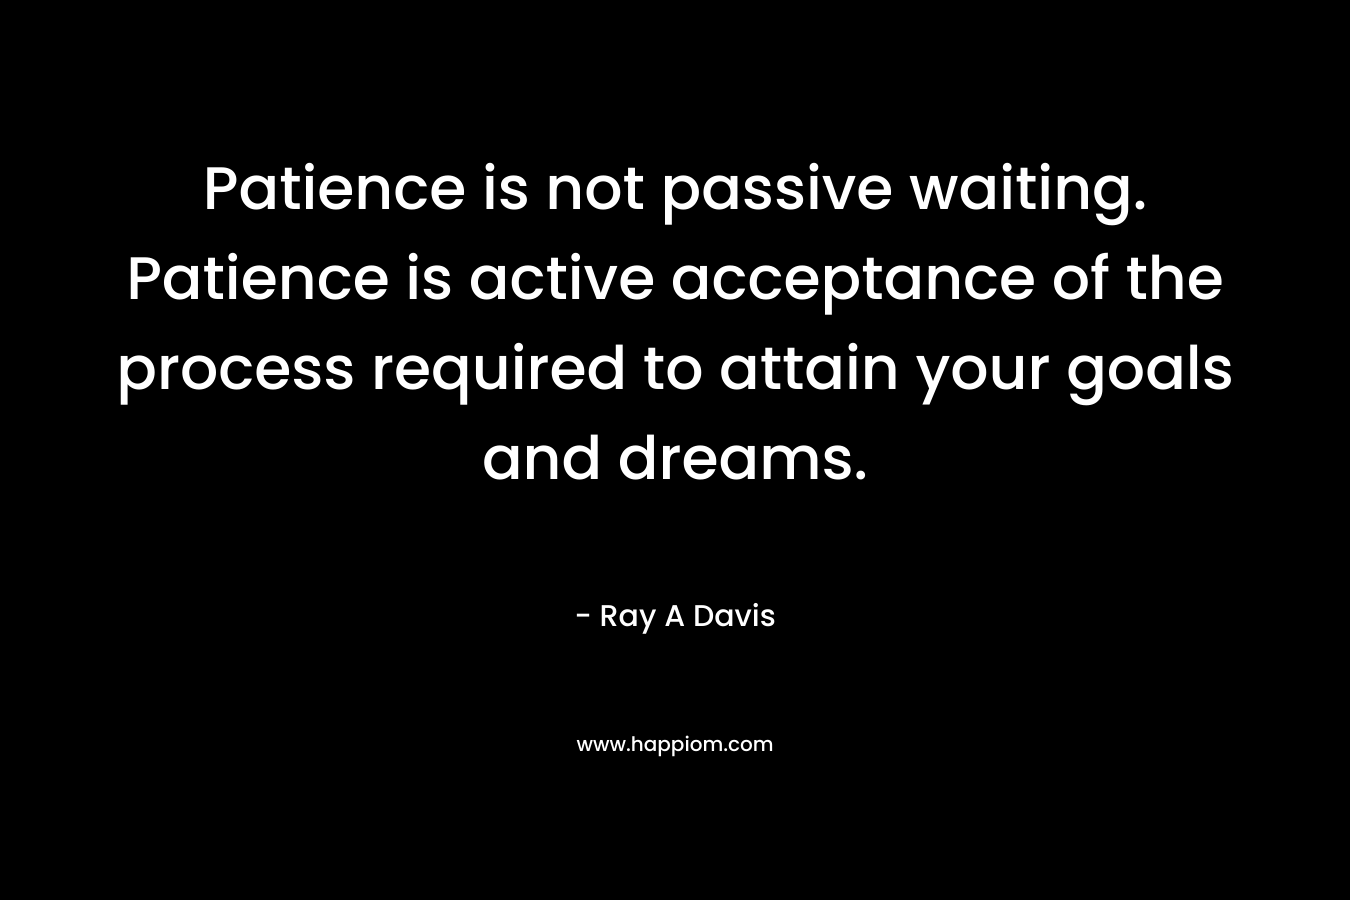 Patience is not passive waiting. Patience is active acceptance of the process required to attain your goals and dreams. – Ray A Davis